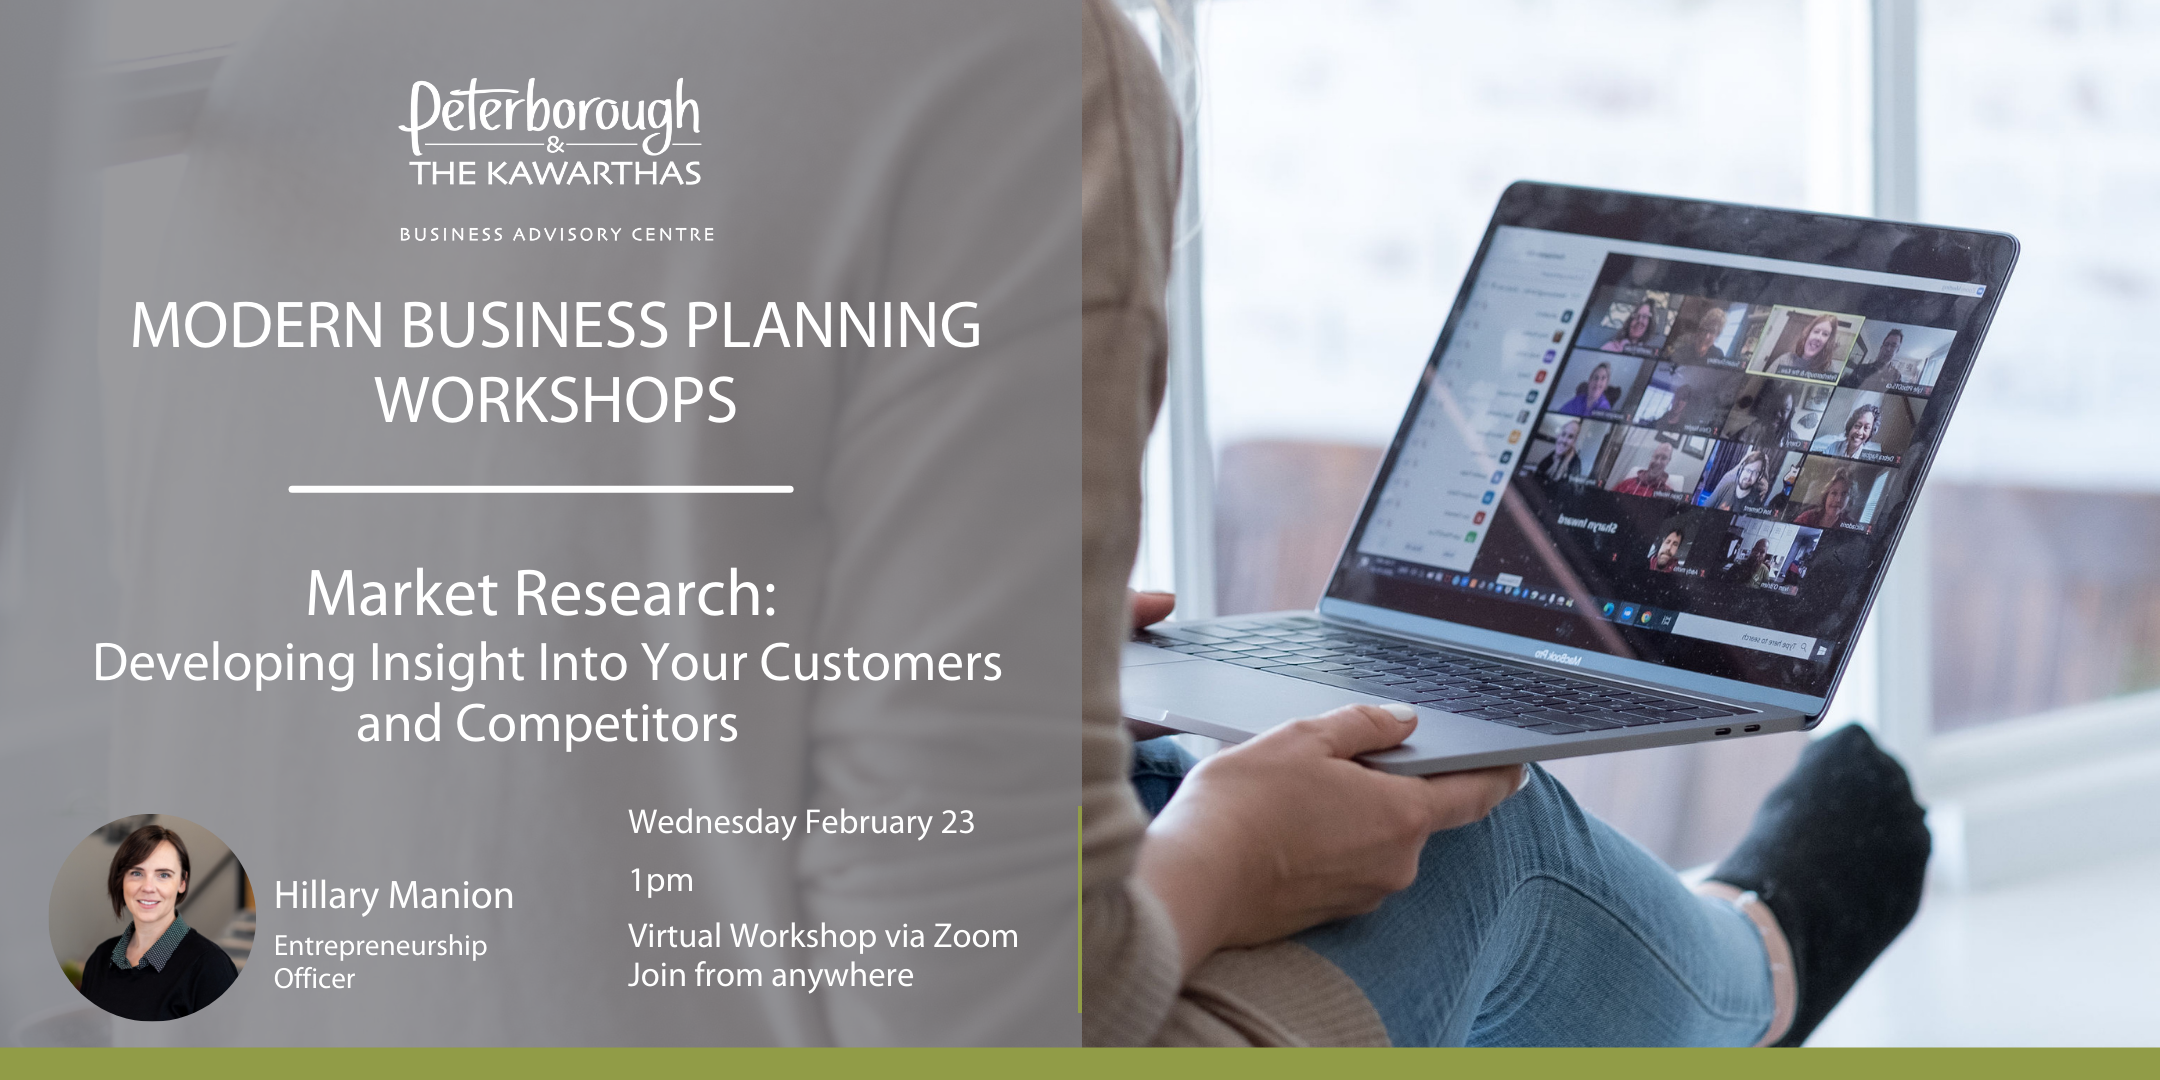 Modern Business Planning Workshops Market Research: Developing Insight Into Your Customers and Competitors